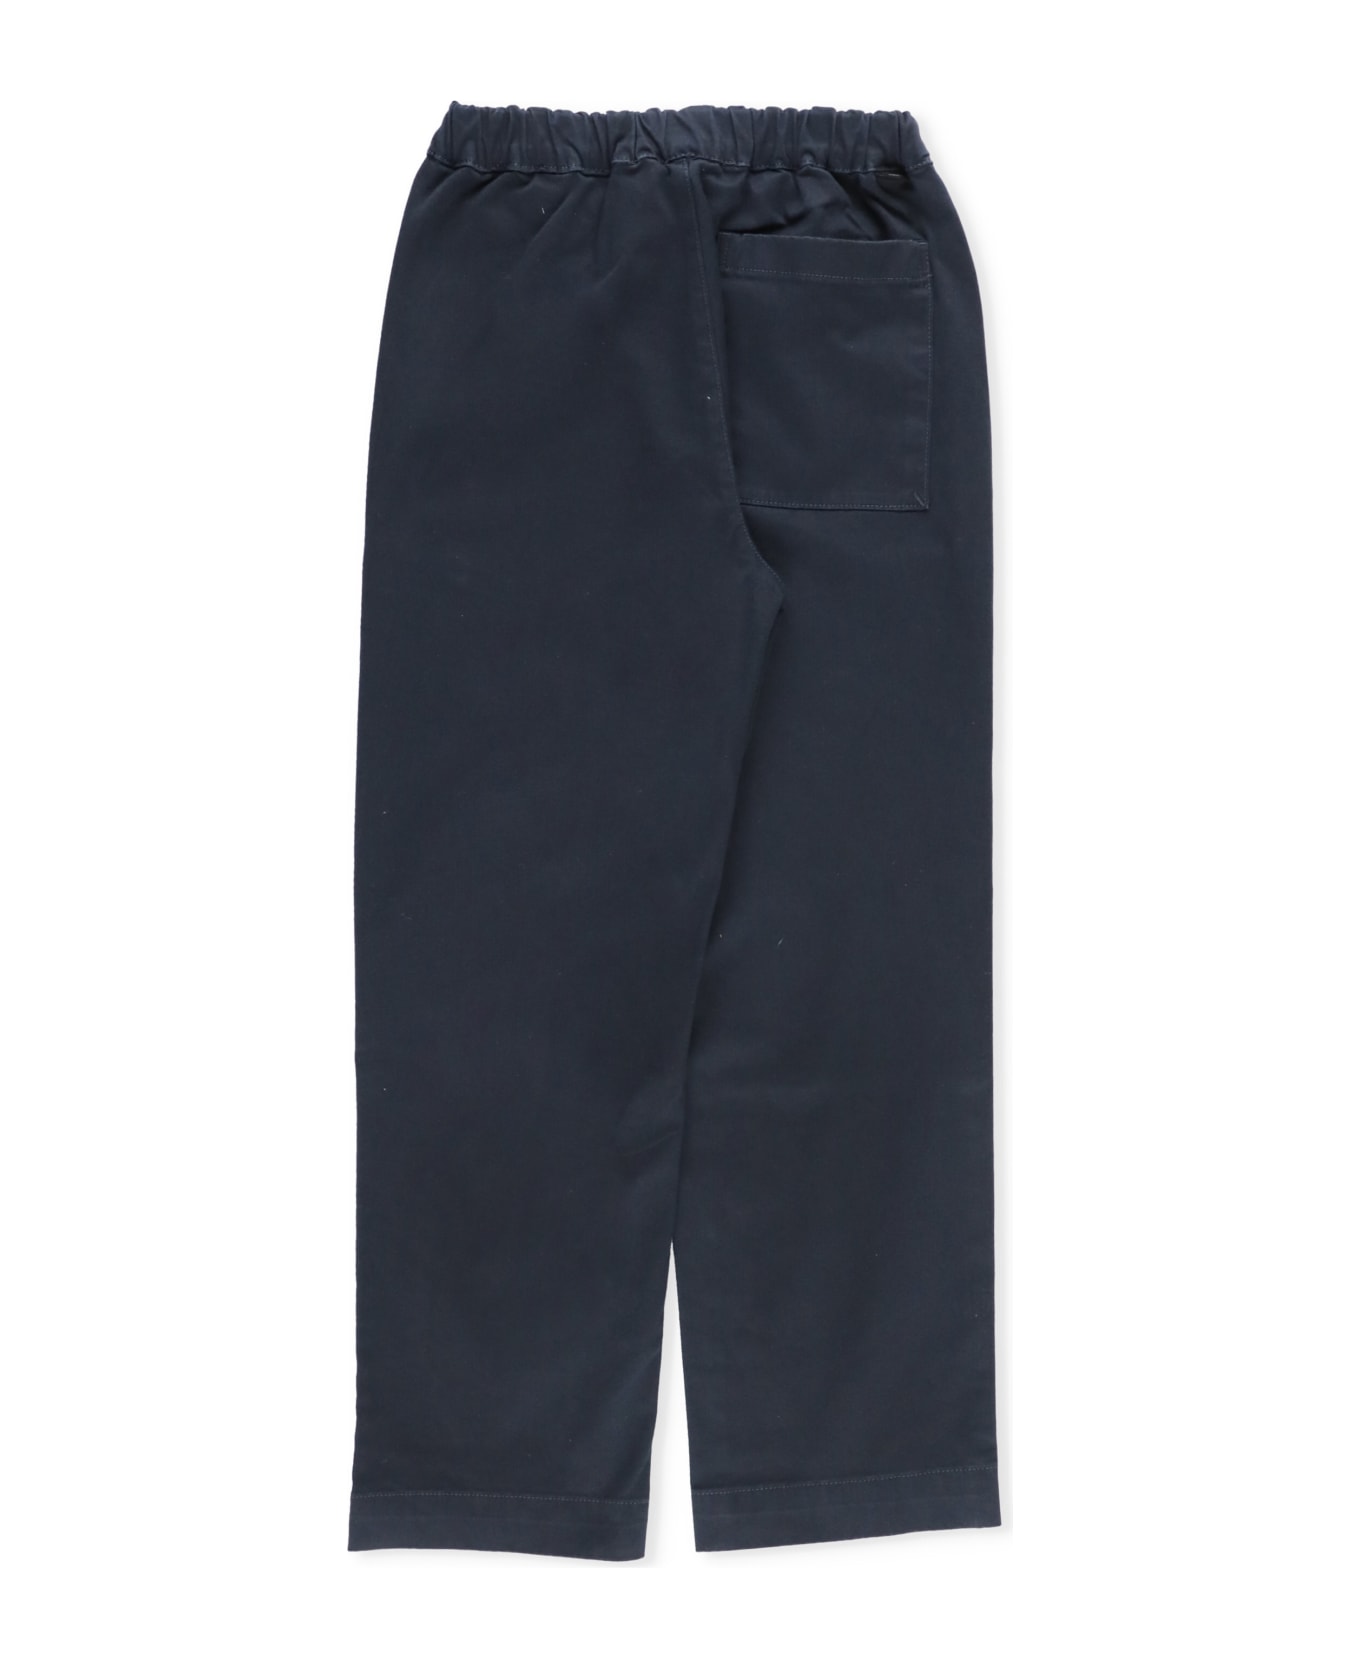 Woolrich Outdoor Pants - NAVY ボトムス